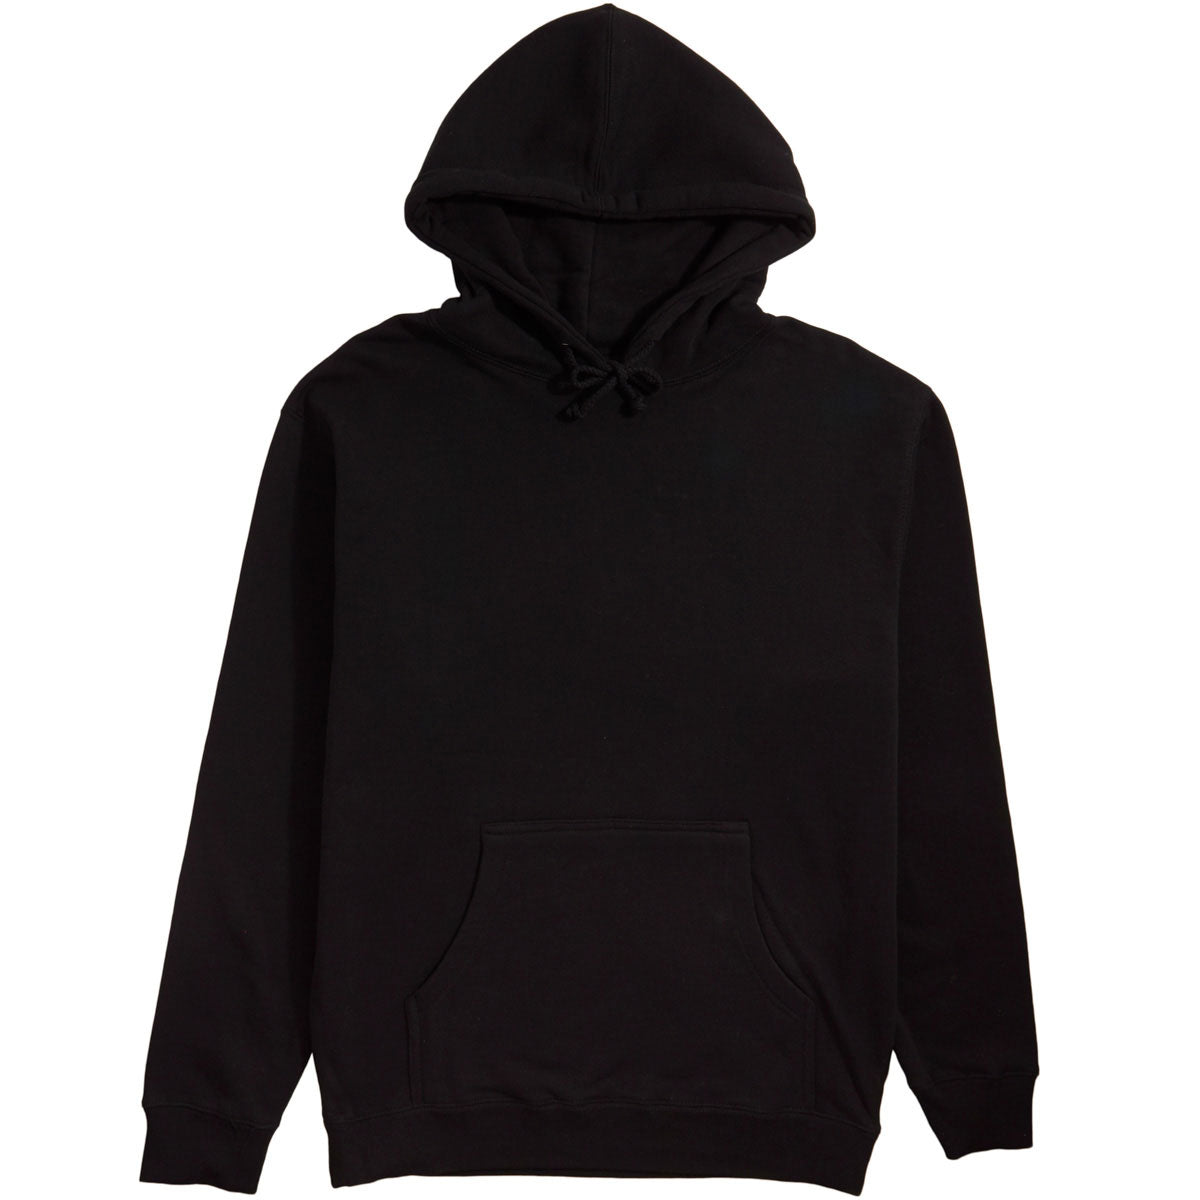 Converse Body Horror Pullover Hoodie - Black - XL image 1